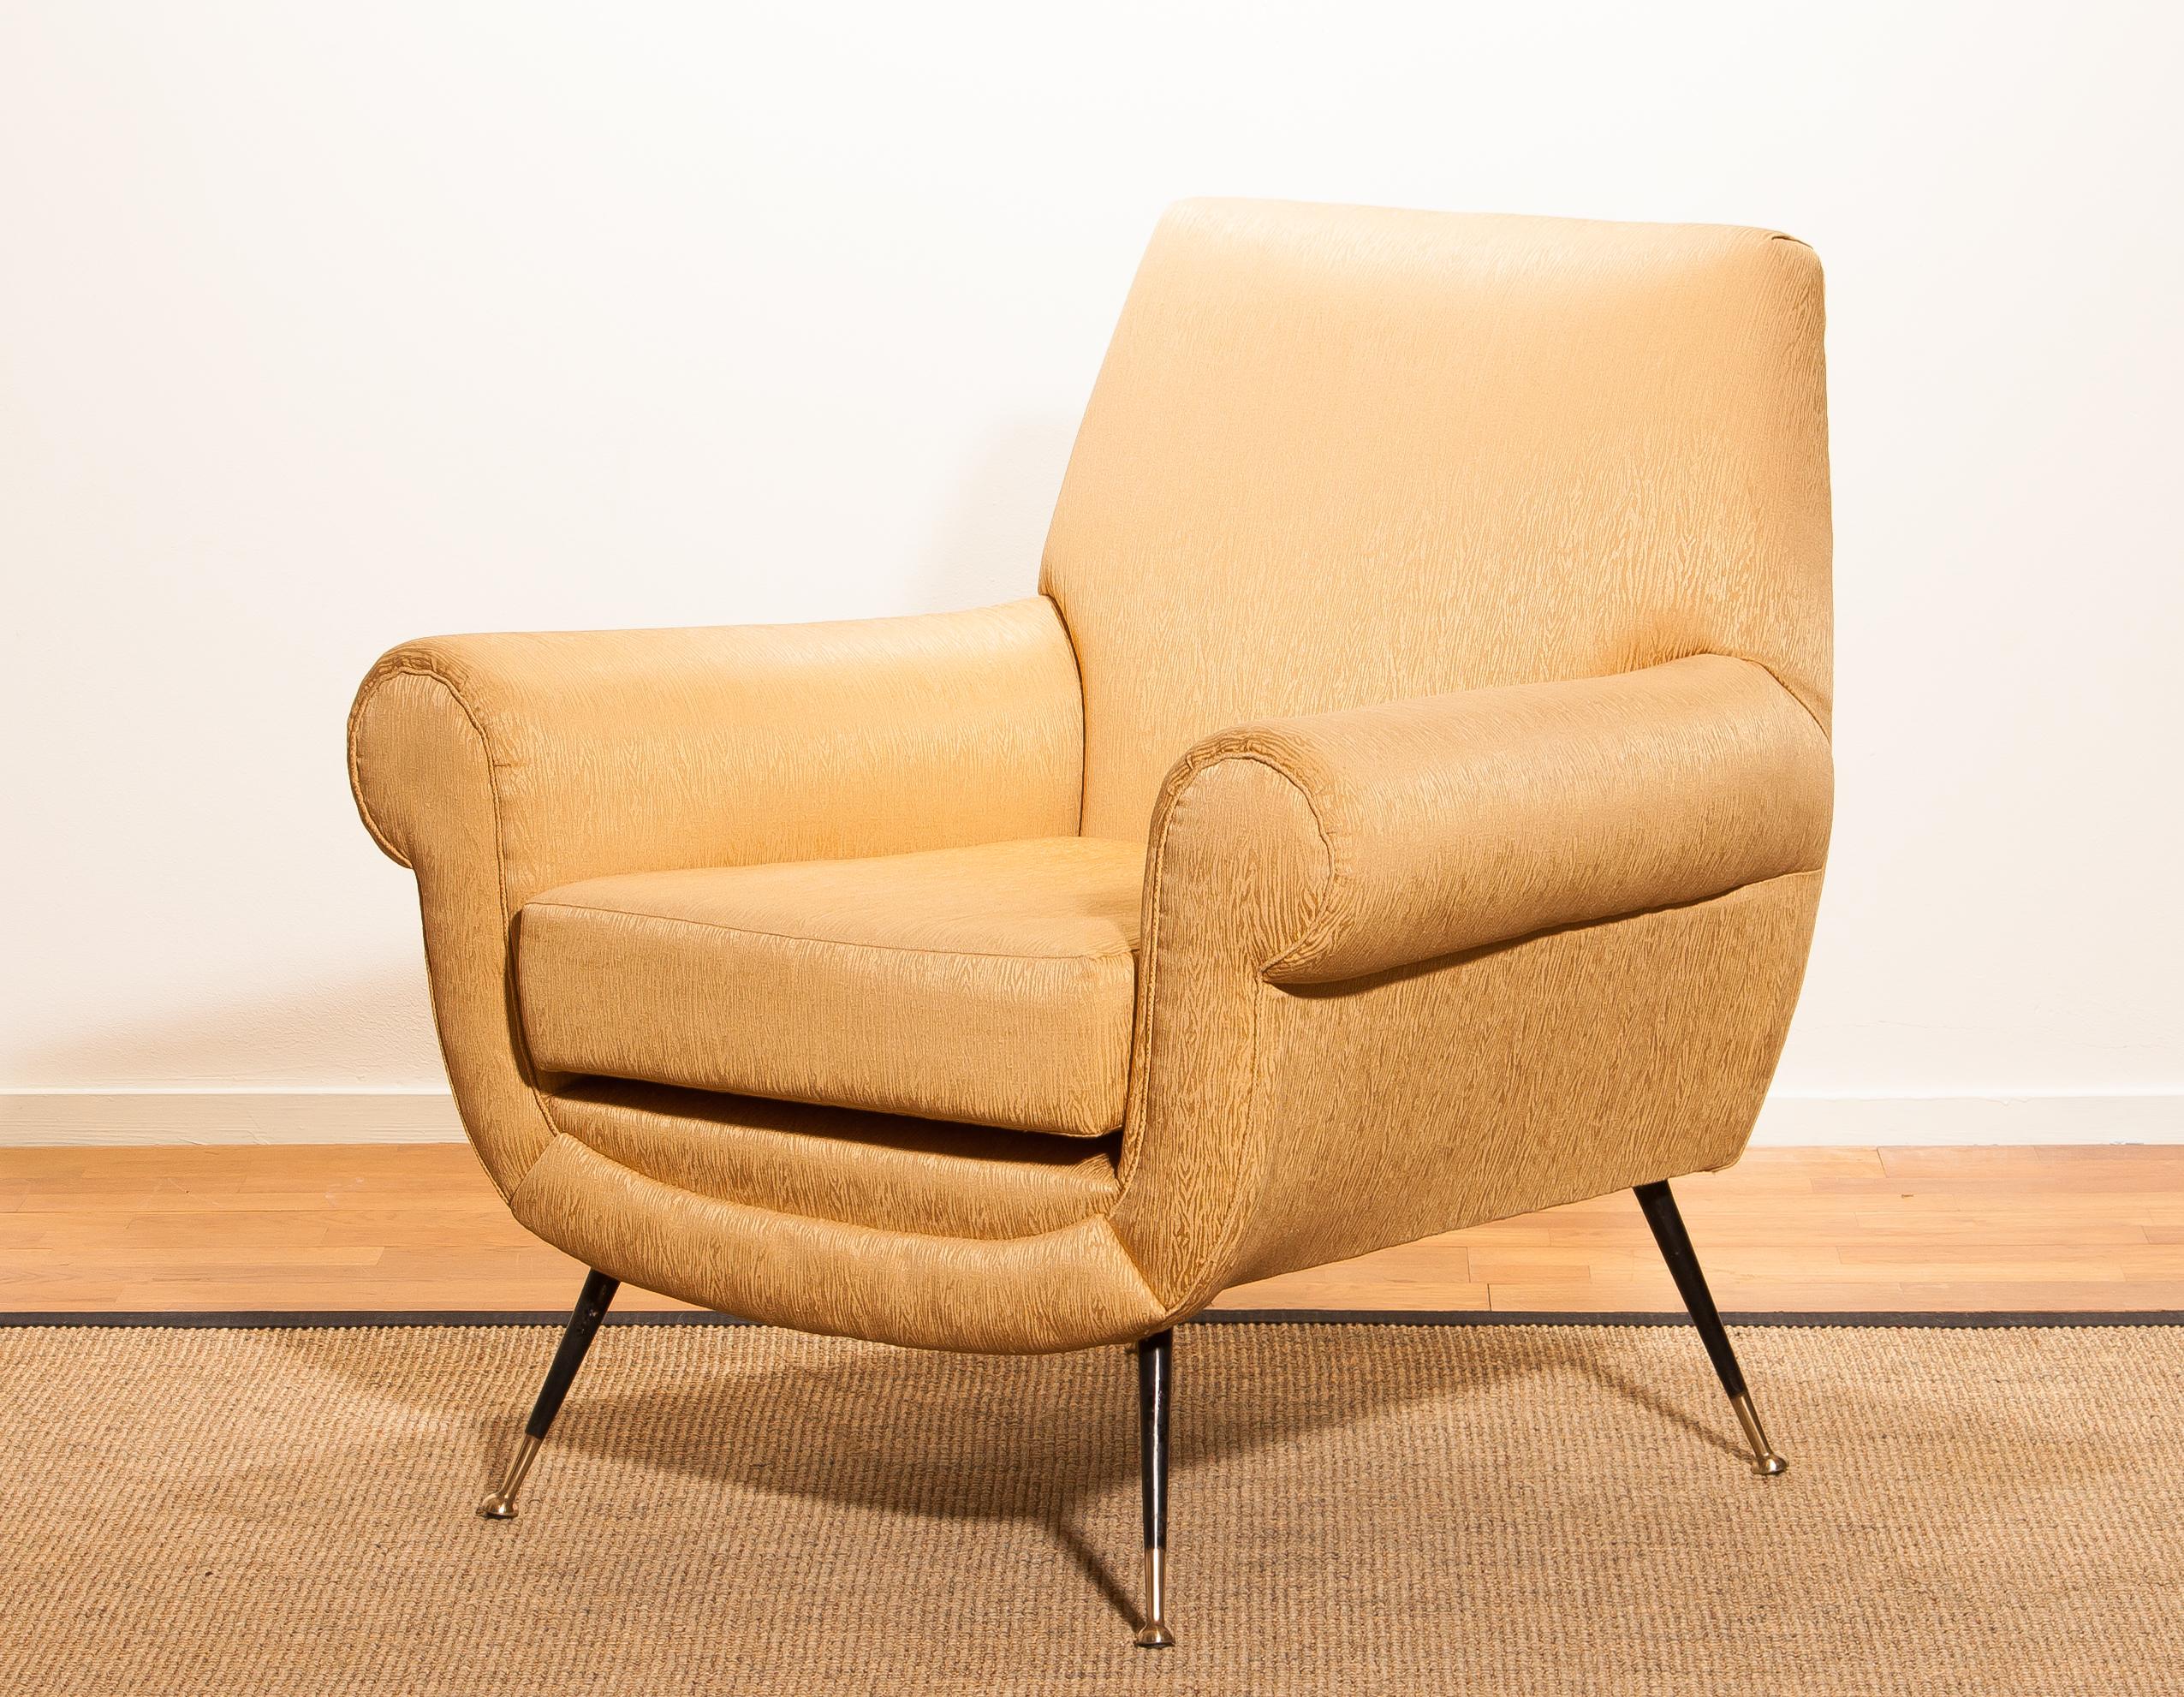 Beautiful and excellent Italian midcentury lounge chair of the 1950s. With the original brass stiletto legs and golden jacquard fabric (later period), all in perfect condition and with an extremely comfortable seat. Designed by Gigi Radice for